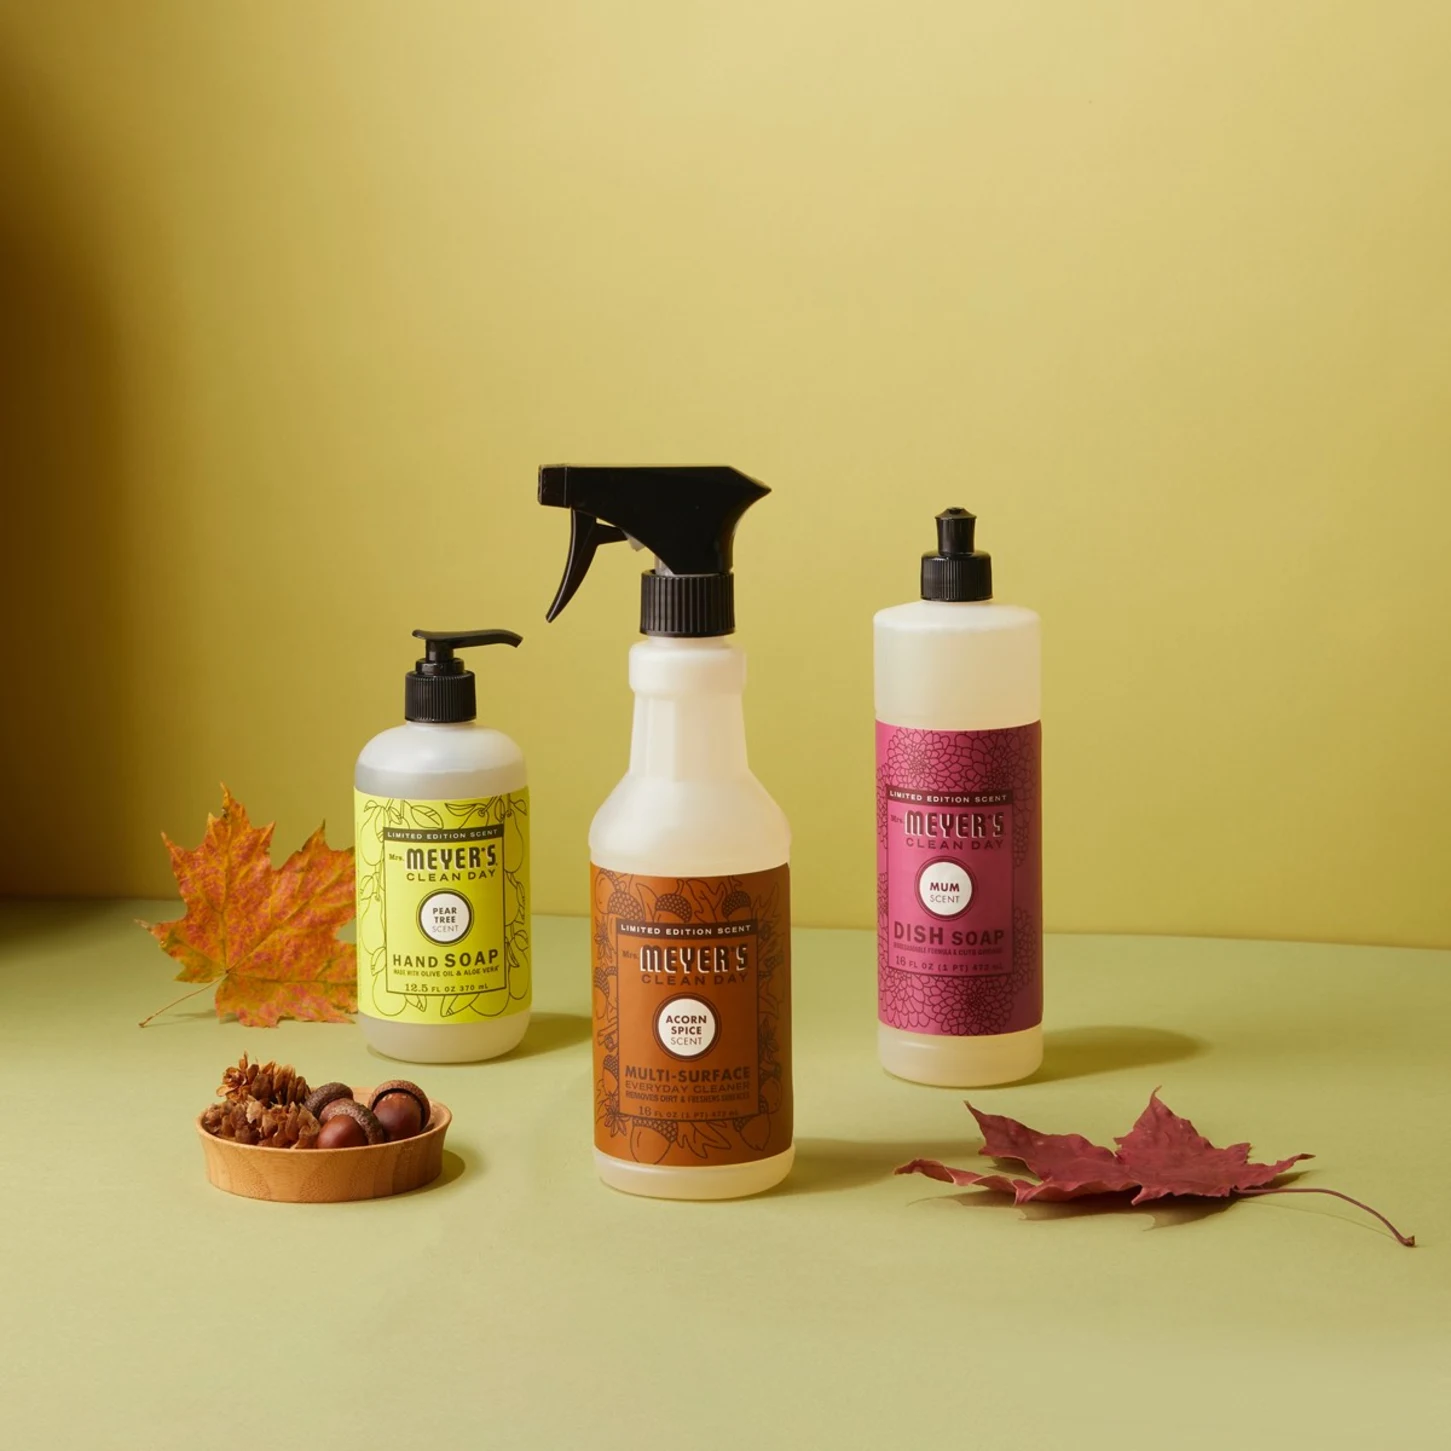 Shop MRS MEYERS CLEAN DAY Fall Hand Soap Variety Pack - Acorn